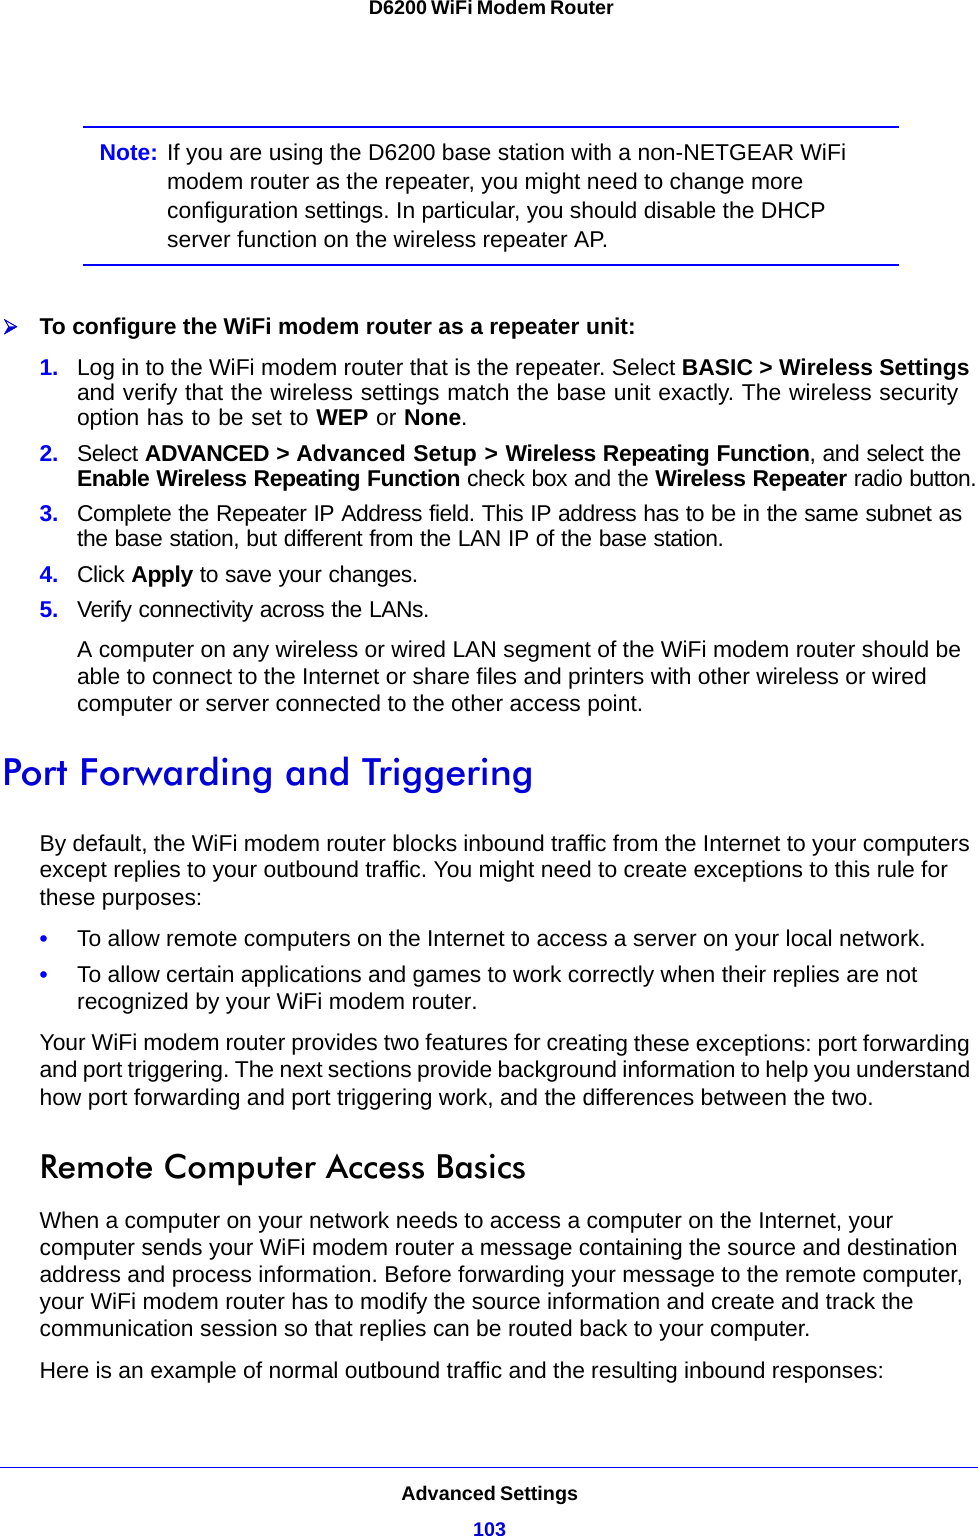 Advanced Settings103 D6200 WiFi Modem RouterNote: If you are using the D6200 base station with a non-NETGEAR WiFi modem router as the repeater, you might need to change more configuration settings. In particular, you should disable the DHCP server function on the wireless repeater AP.To configure the WiFi modem router as a repeater unit:1. Log in to the WiFi modem router that is the repeater. Select BASIC &gt; Wireless Settings and verify that the wireless settings match the base unit exactly. The wireless security option has to be set to WEP or None.2. Select ADVANCED &gt; Advanced Setup &gt; Wireless Repeating Function, and select the Enable Wireless Repeating Function check box and the Wireless Repeater radio button.3. Complete the Repeater IP Address field. This IP address has to be in the same subnet as the base station, but different from the LAN IP of the base station.4. Click Apply to save your changes.5. Verify connectivity across the LANs. A computer on any wireless or wired LAN segment of the WiFi modem router should be able to connect to the Internet or share files and printers with other wireless or wired computer or server connected to the other access point.Port Forwarding and TriggeringBy default, the WiFi modem router blocks inbound traffic from the Internet to your computers except replies to your outbound traffic. You might need to create exceptions to this rule for these purposes:•To allow remote computers on the Internet to access a server on your local network. •To allow certain applications and games to work correctly when their replies are not recognized by your WiFi modem router.Your WiFi modem router provides two features for creating these exceptions: port forwarding and port triggering. The next sections provide background information to help you understand how port forwarding and port triggering work, and the differences between the two.Remote Computer Access BasicsWhen a computer on your network needs to access a computer on the Internet, your computer sends your WiFi modem router a message containing the source and destination address and process information. Before forwarding your message to the remote computer, your WiFi modem router has to modify the source information and create and track the communication session so that replies can be routed back to your computer. Here is an example of normal outbound traffic and the resulting inbound responses: